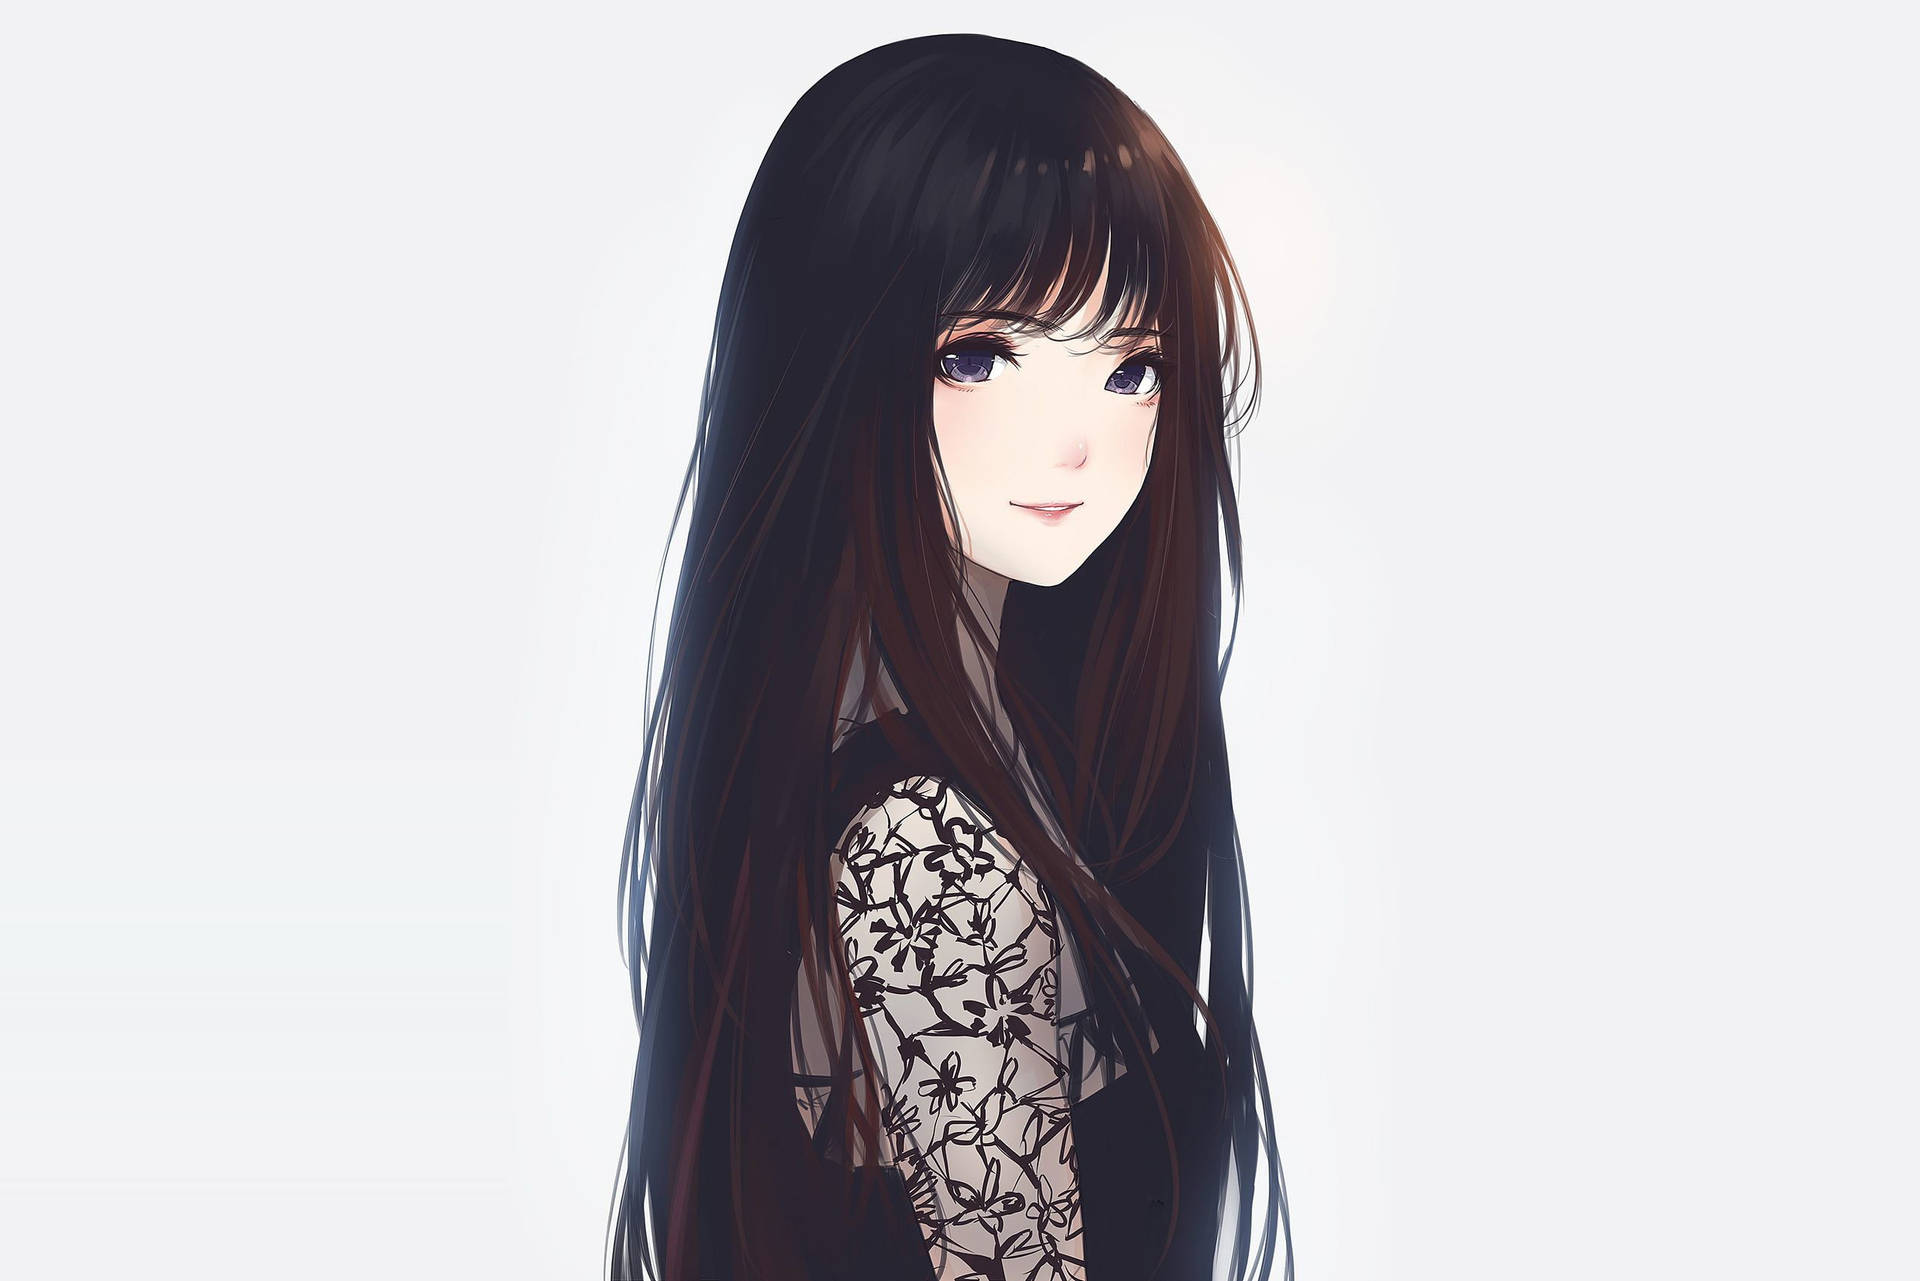 Long-haired Cute Girl Anime Background